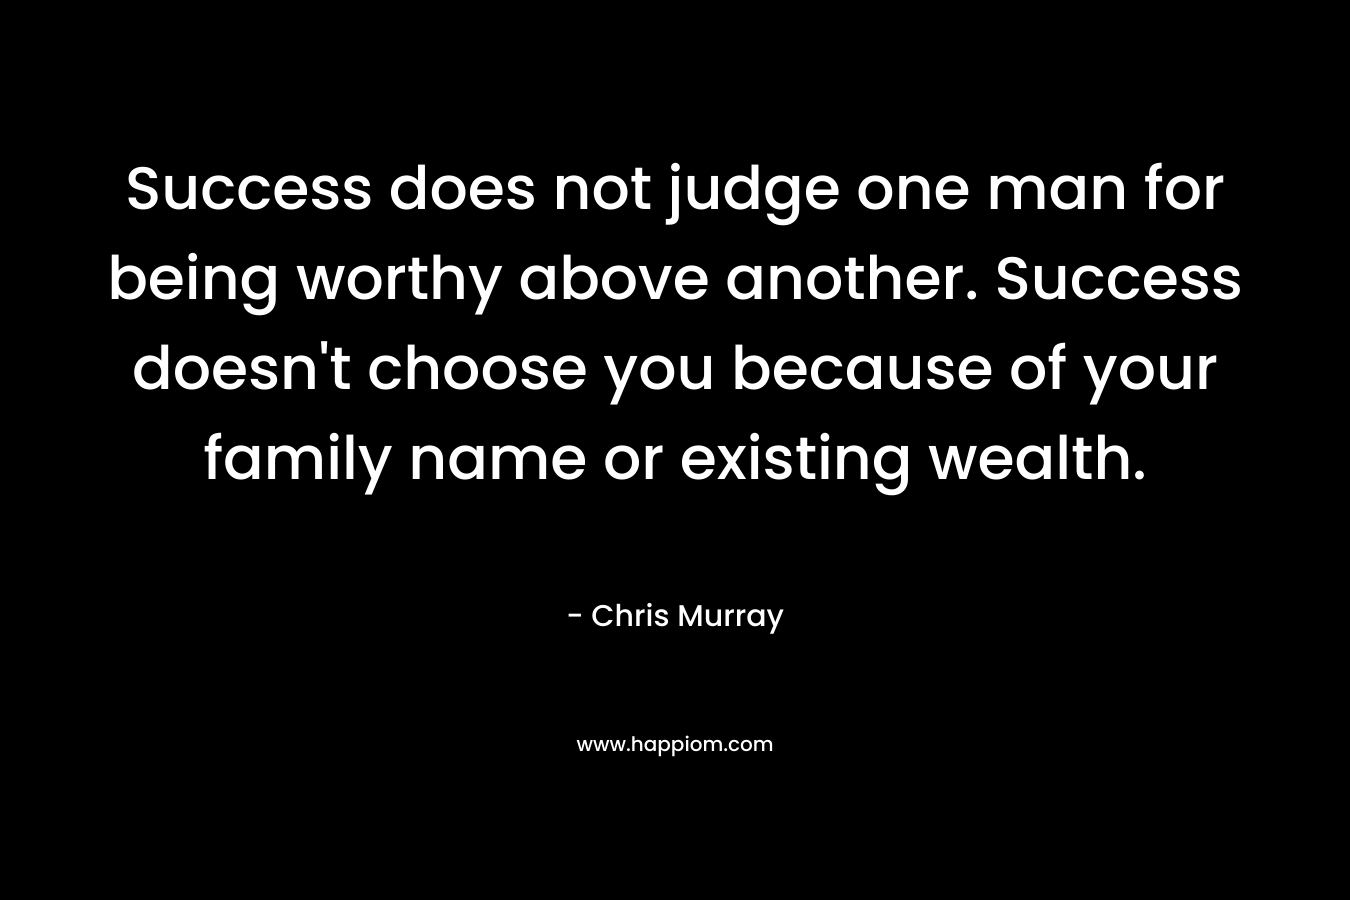 Success does not judge one man for being worthy above another. Success doesn't choose you because of your family name or existing wealth.